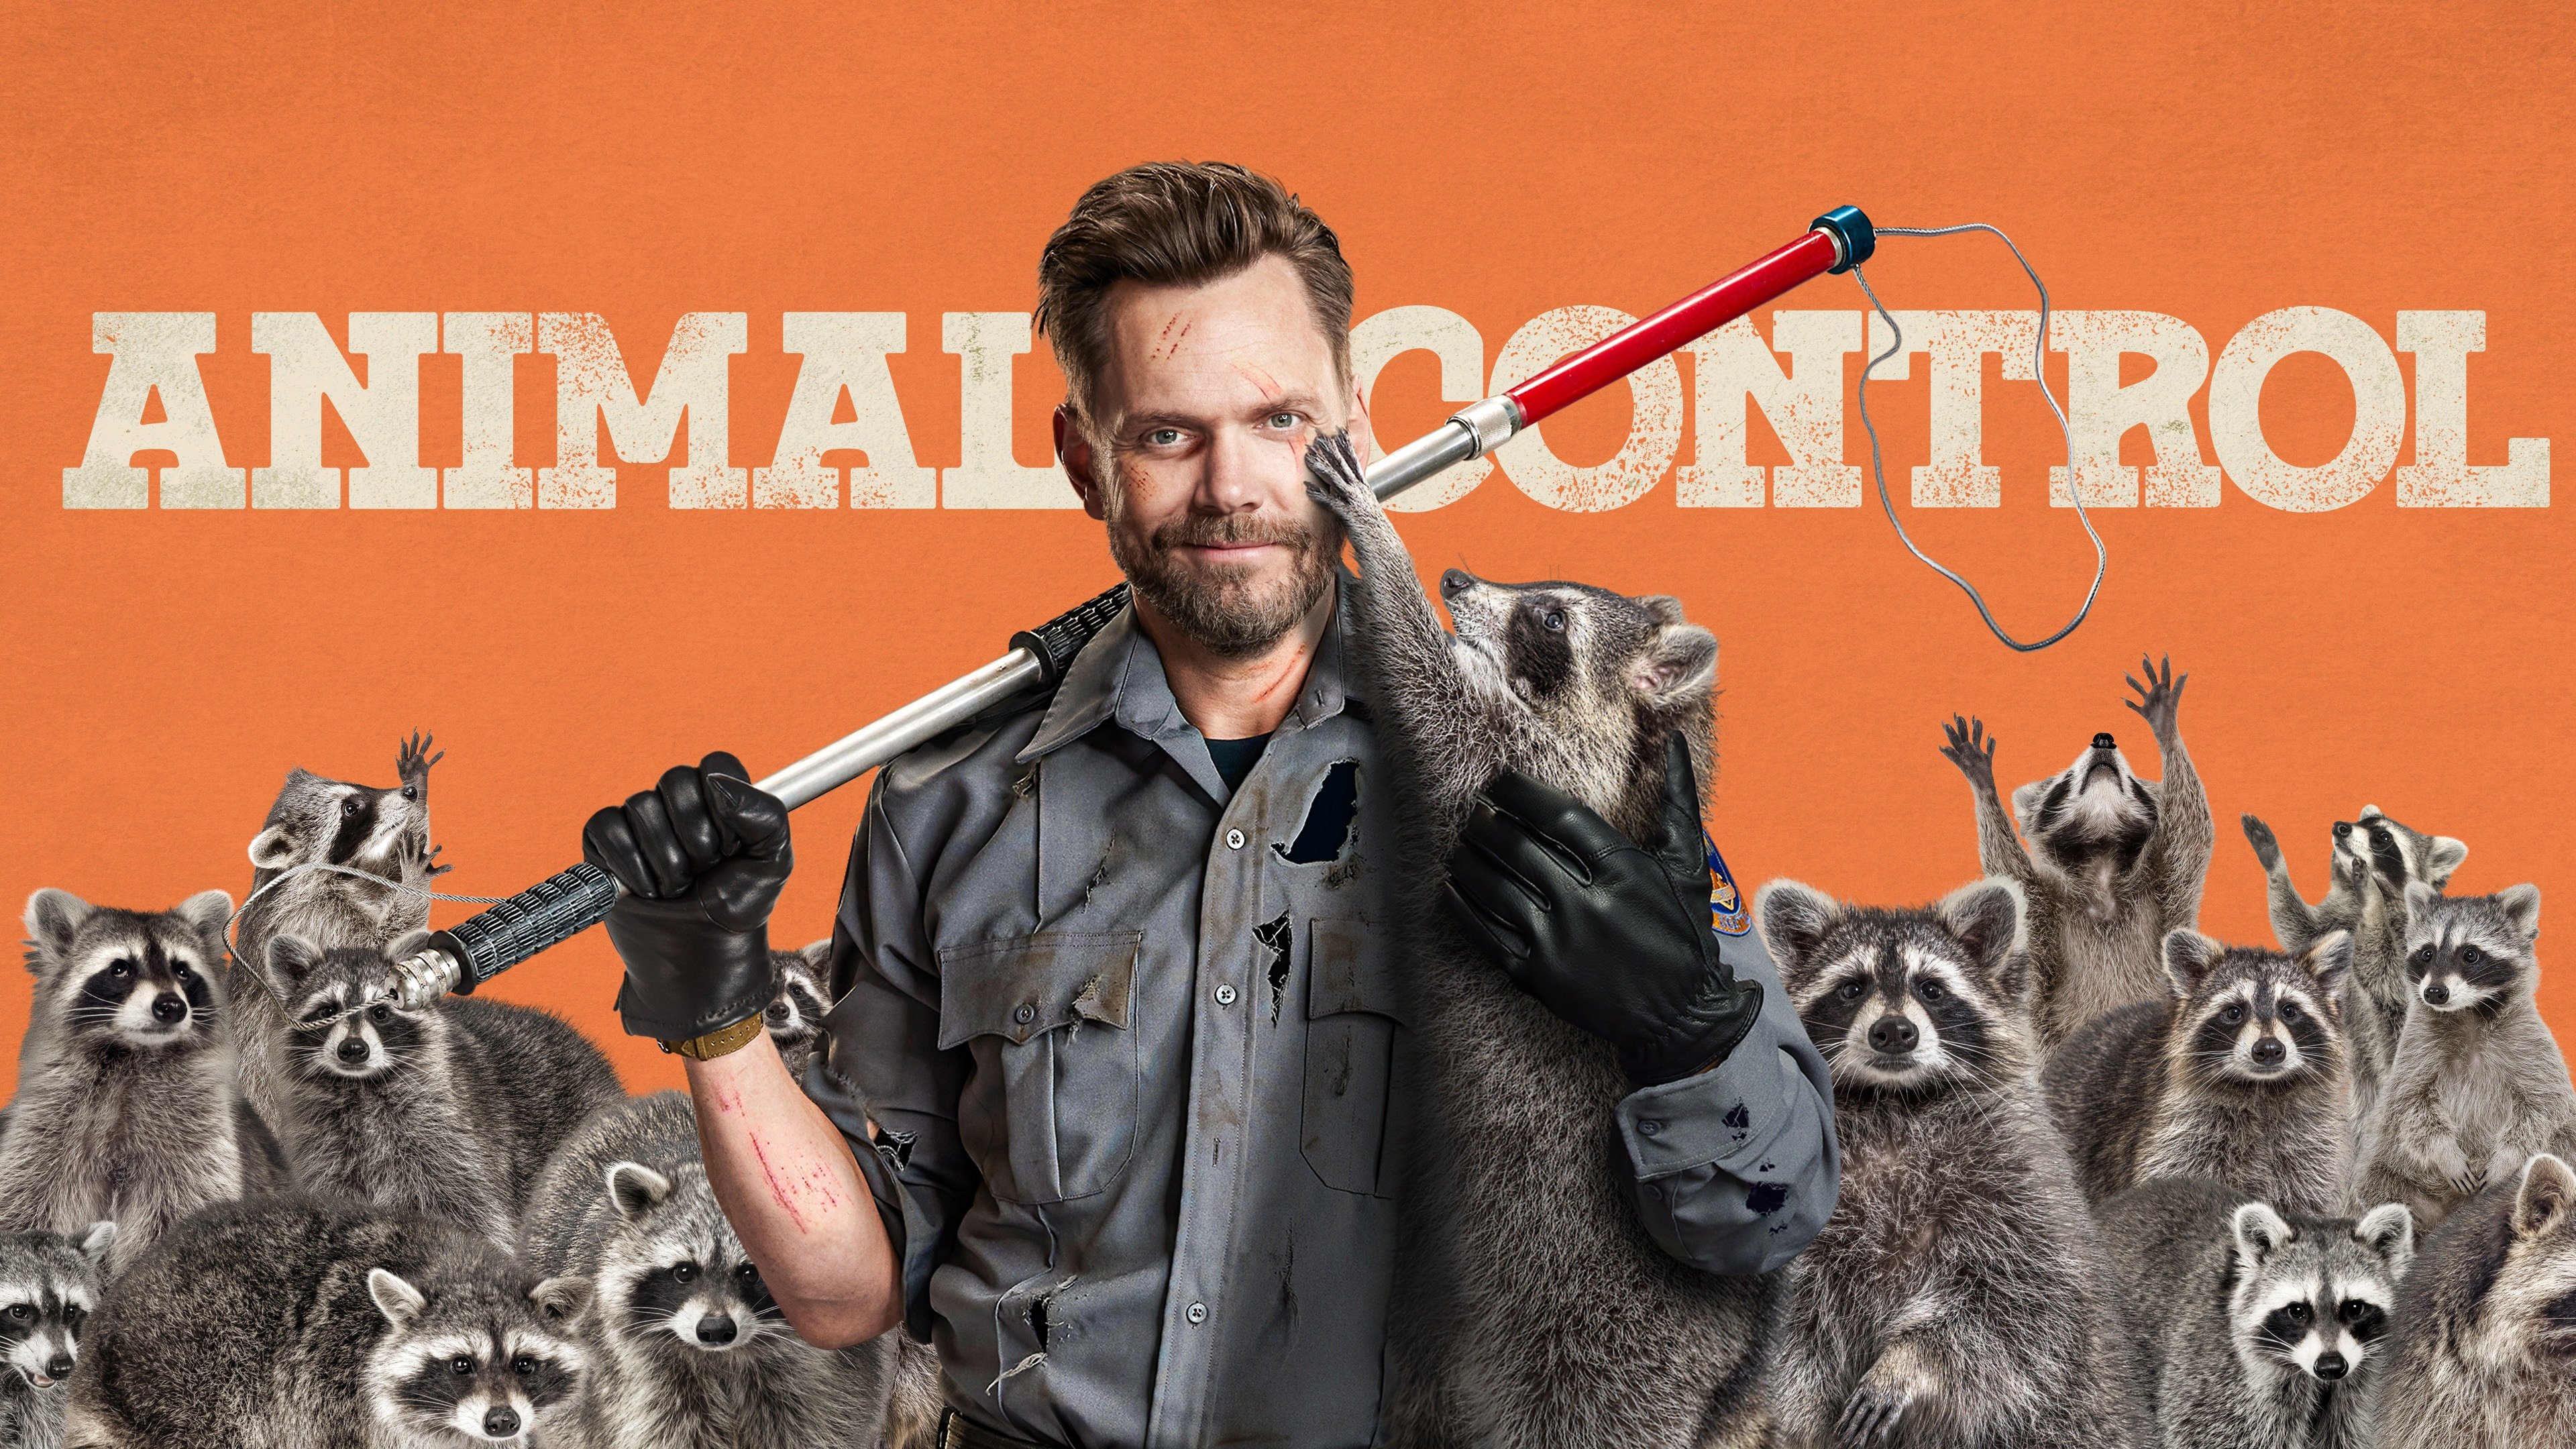 Animal Control Episode 1 Watch Online Free 9 March 2023